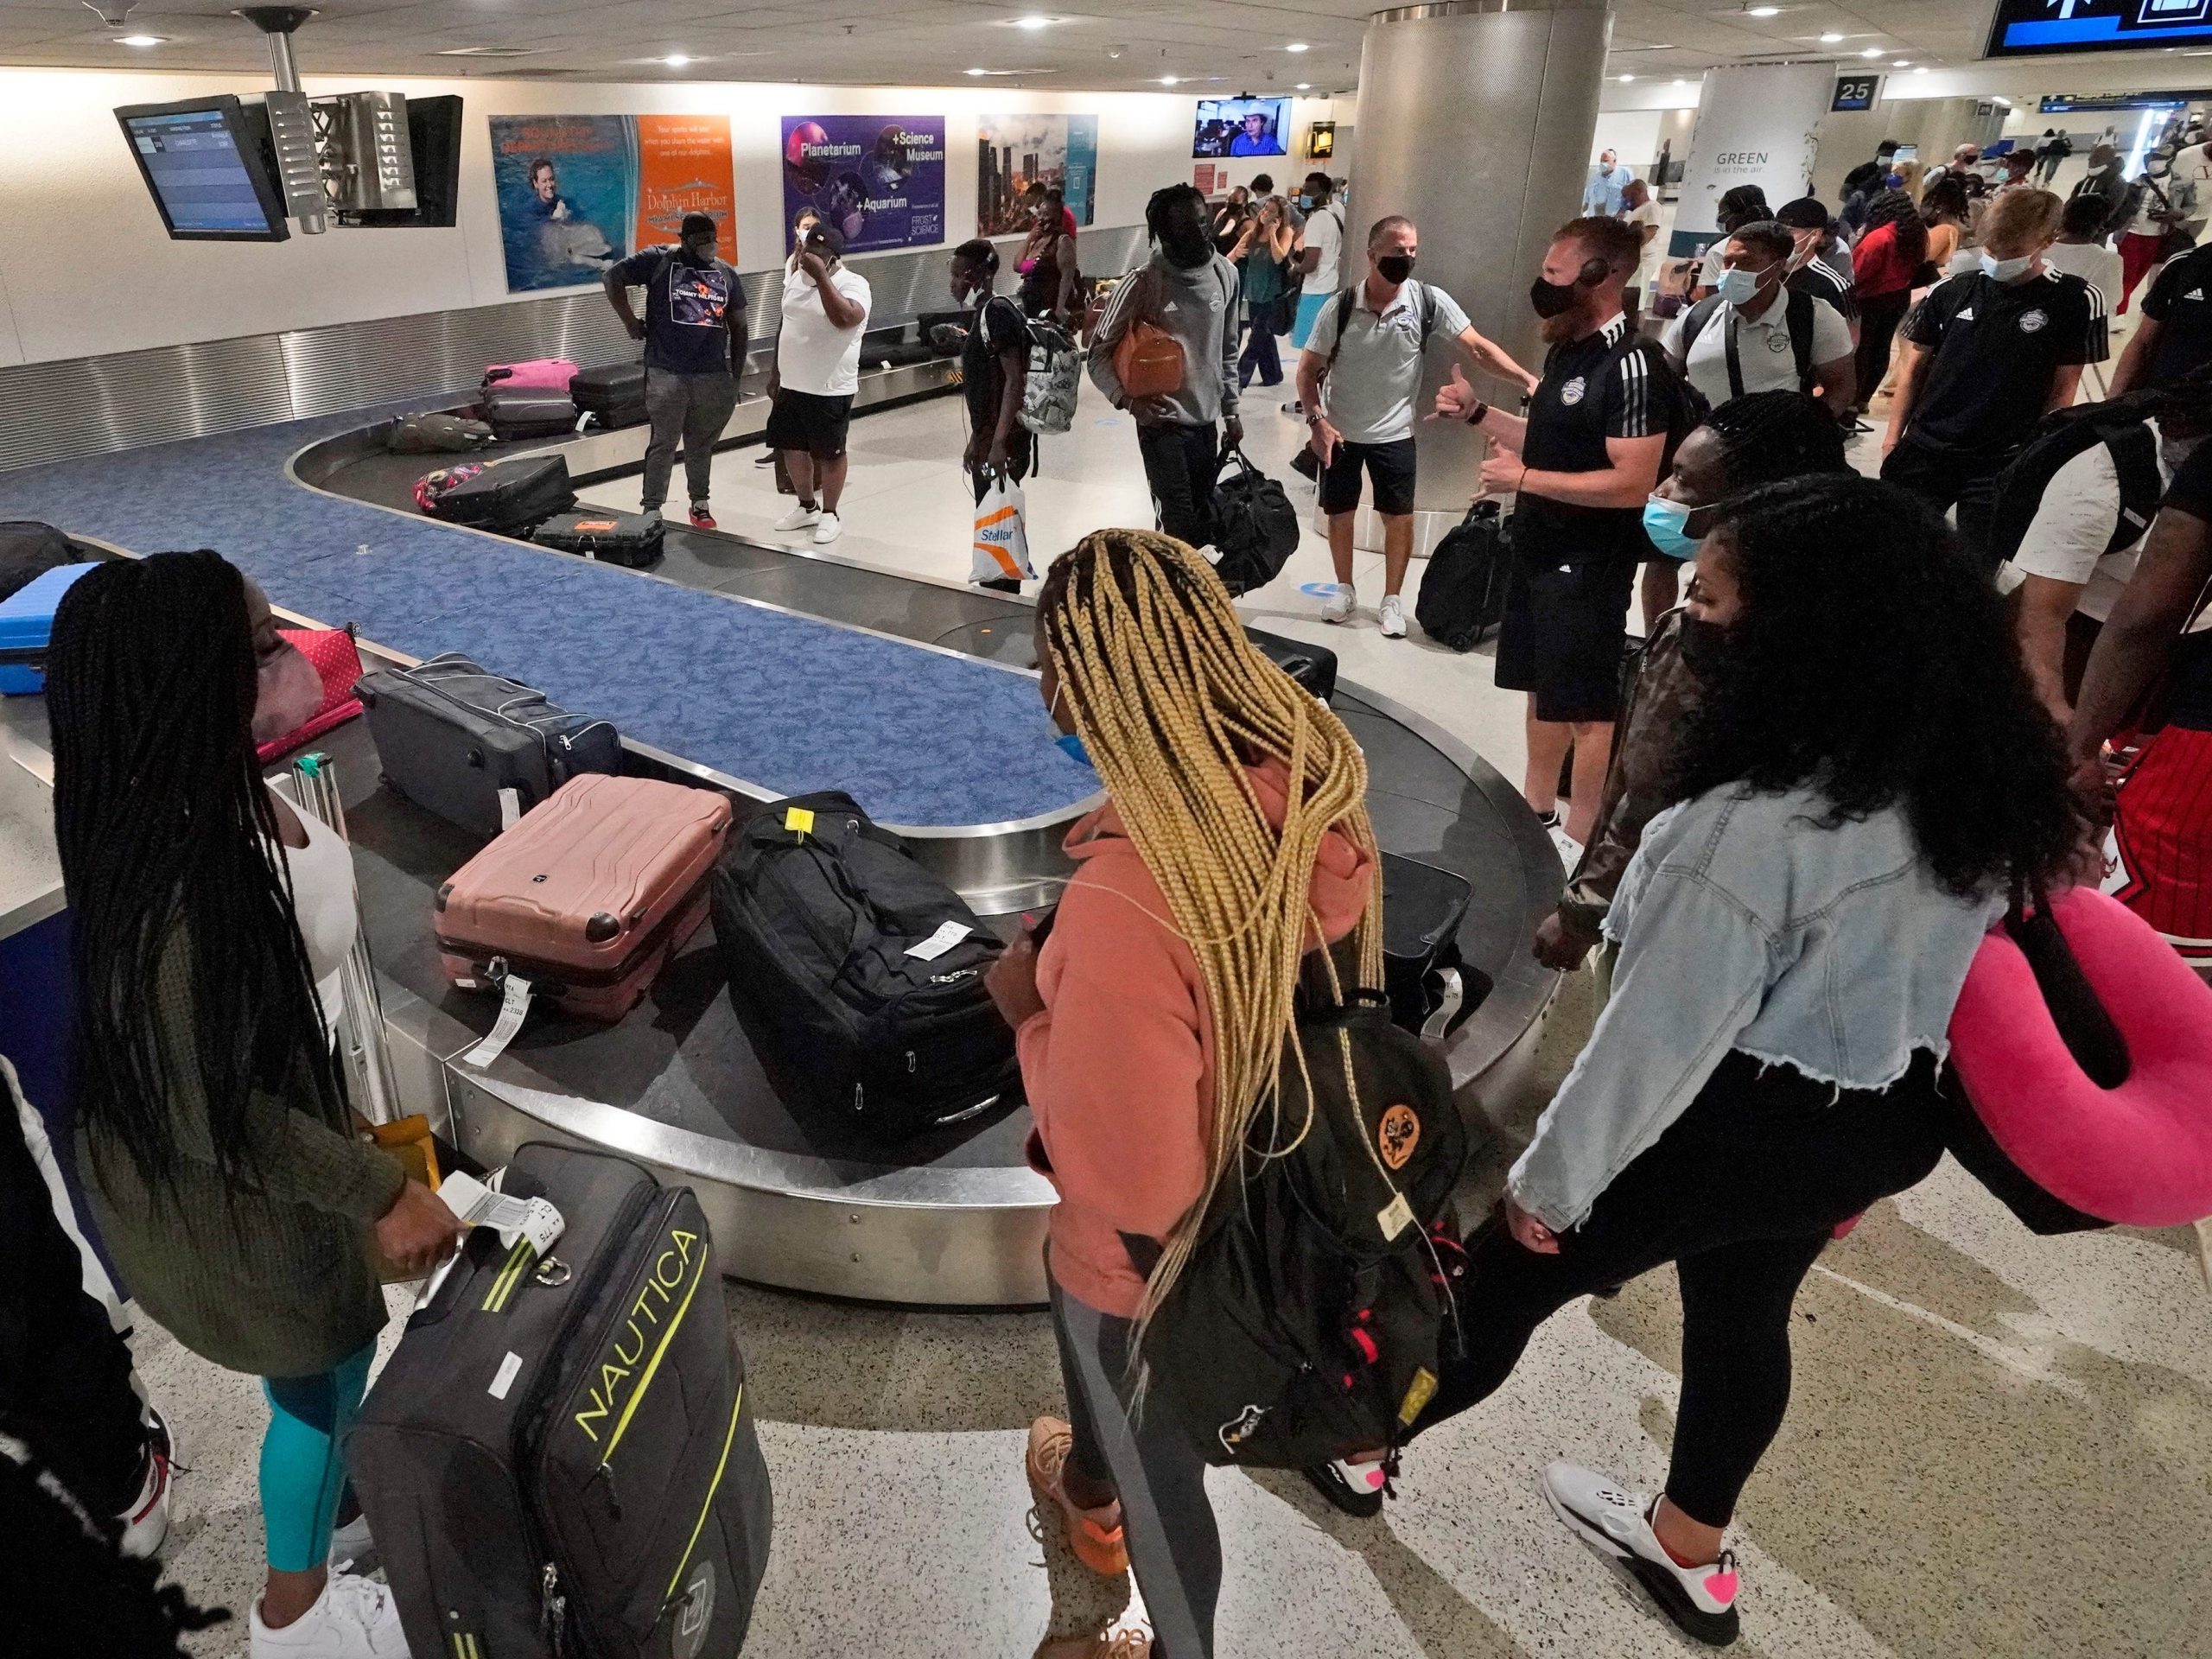 Travelers wait for their luggage at a baggage carousel, Friday, May 28, 2021, at Miami International Airport in Miami.